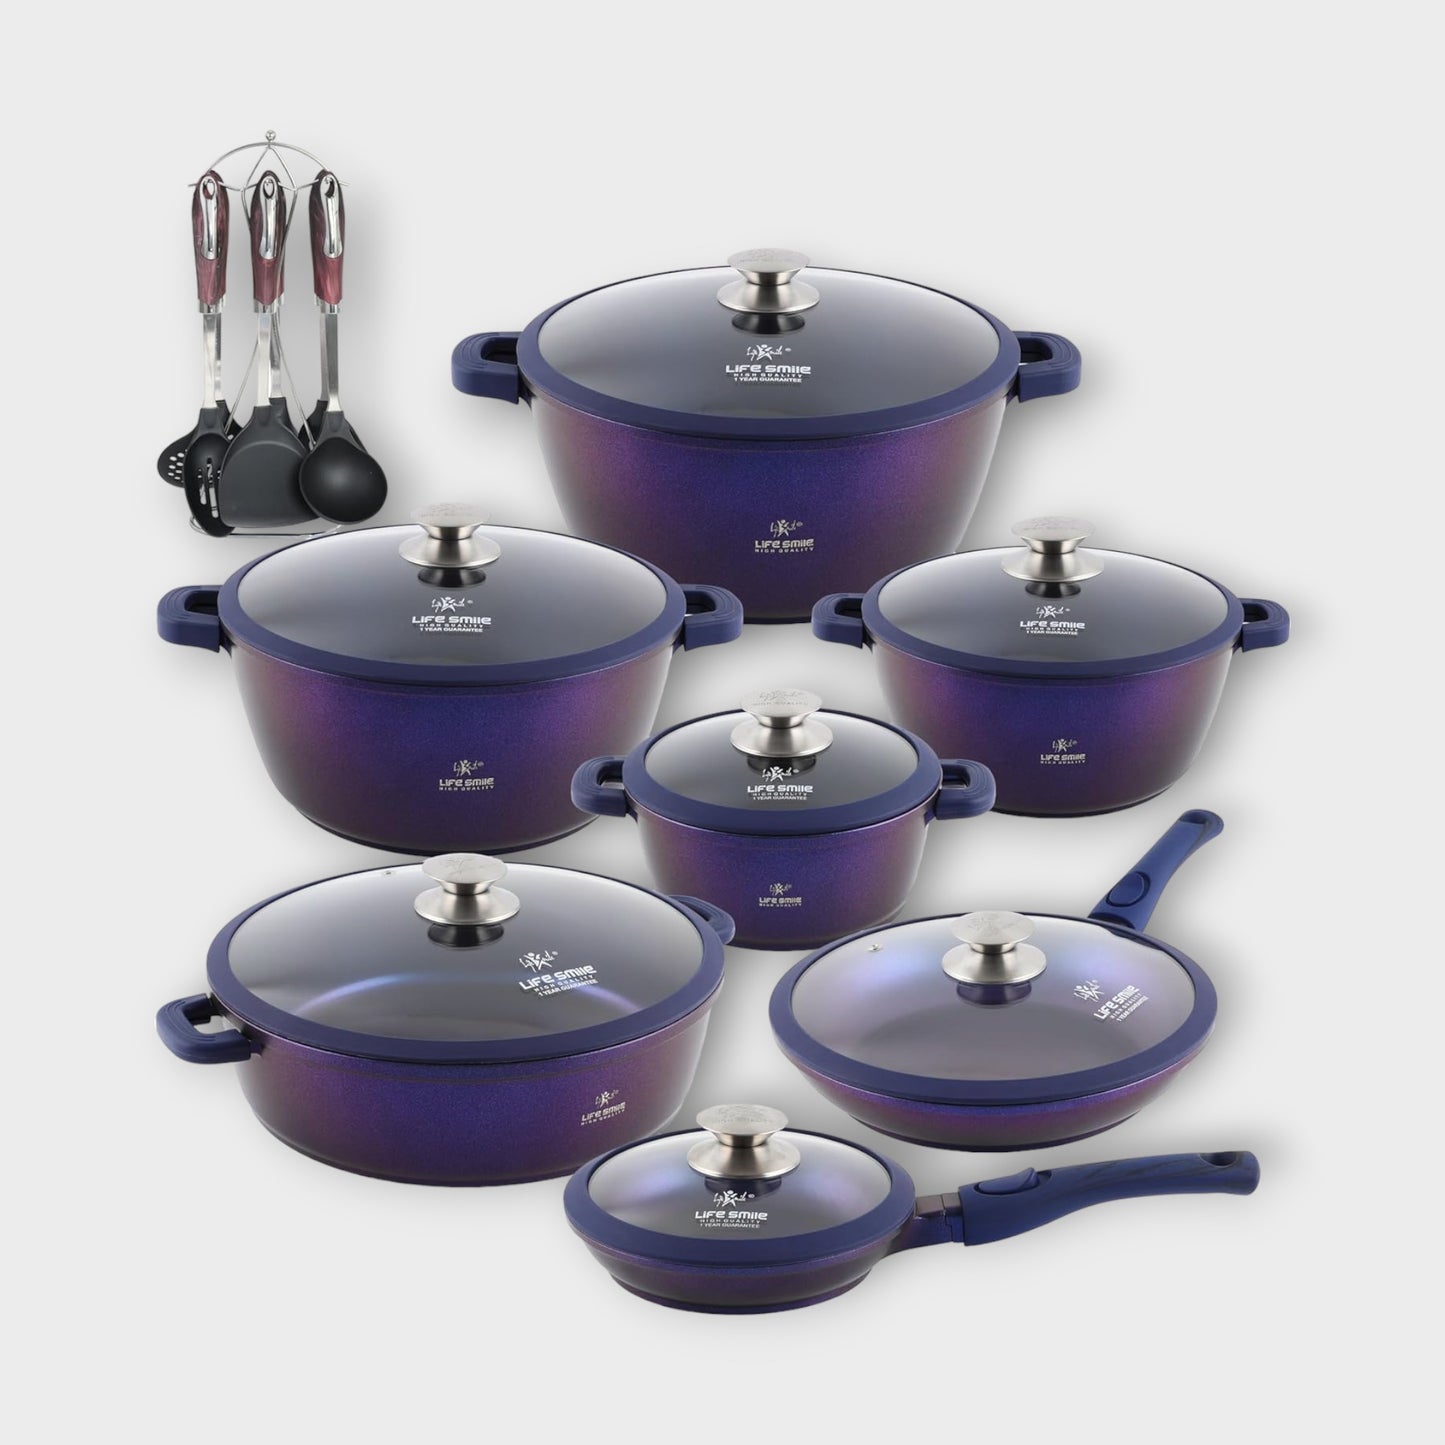 Shine Granite Non-Stick Cookware Set. Durable & Easy Cleaning 